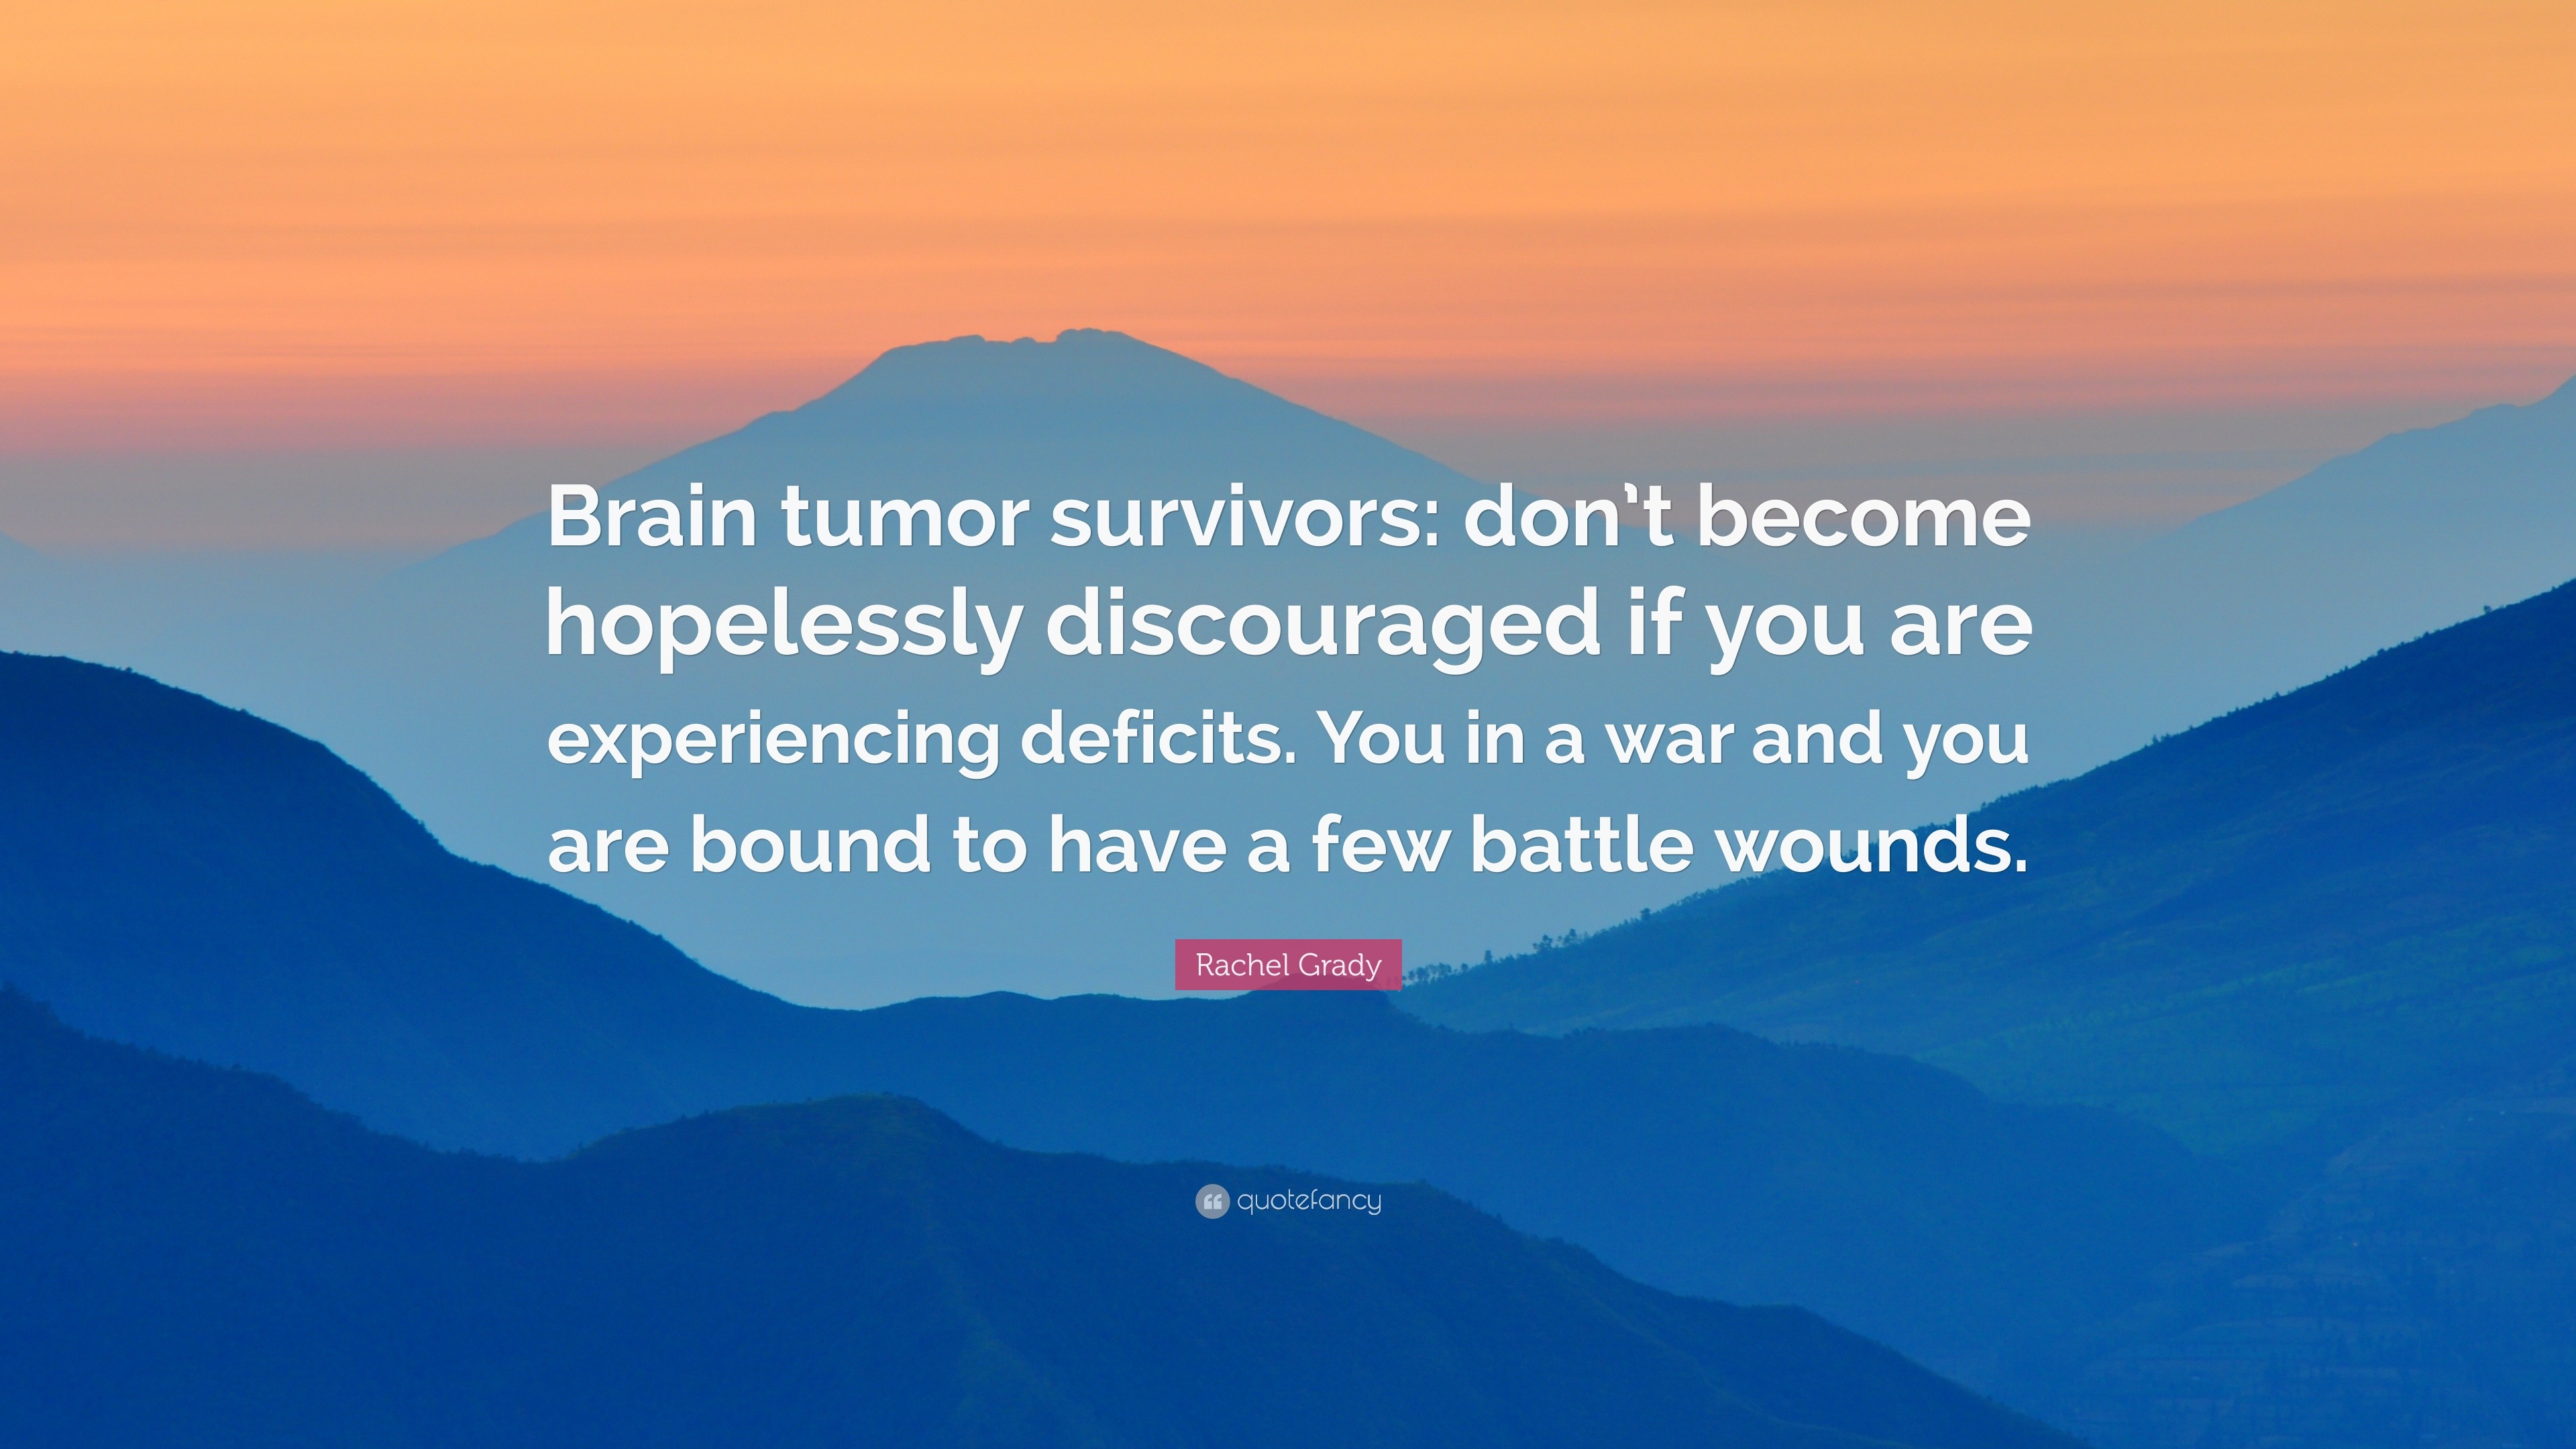 Rachel Grady Quote “brain Tumor Survivors Don’t Become Hopelessly Discouraged If You Are